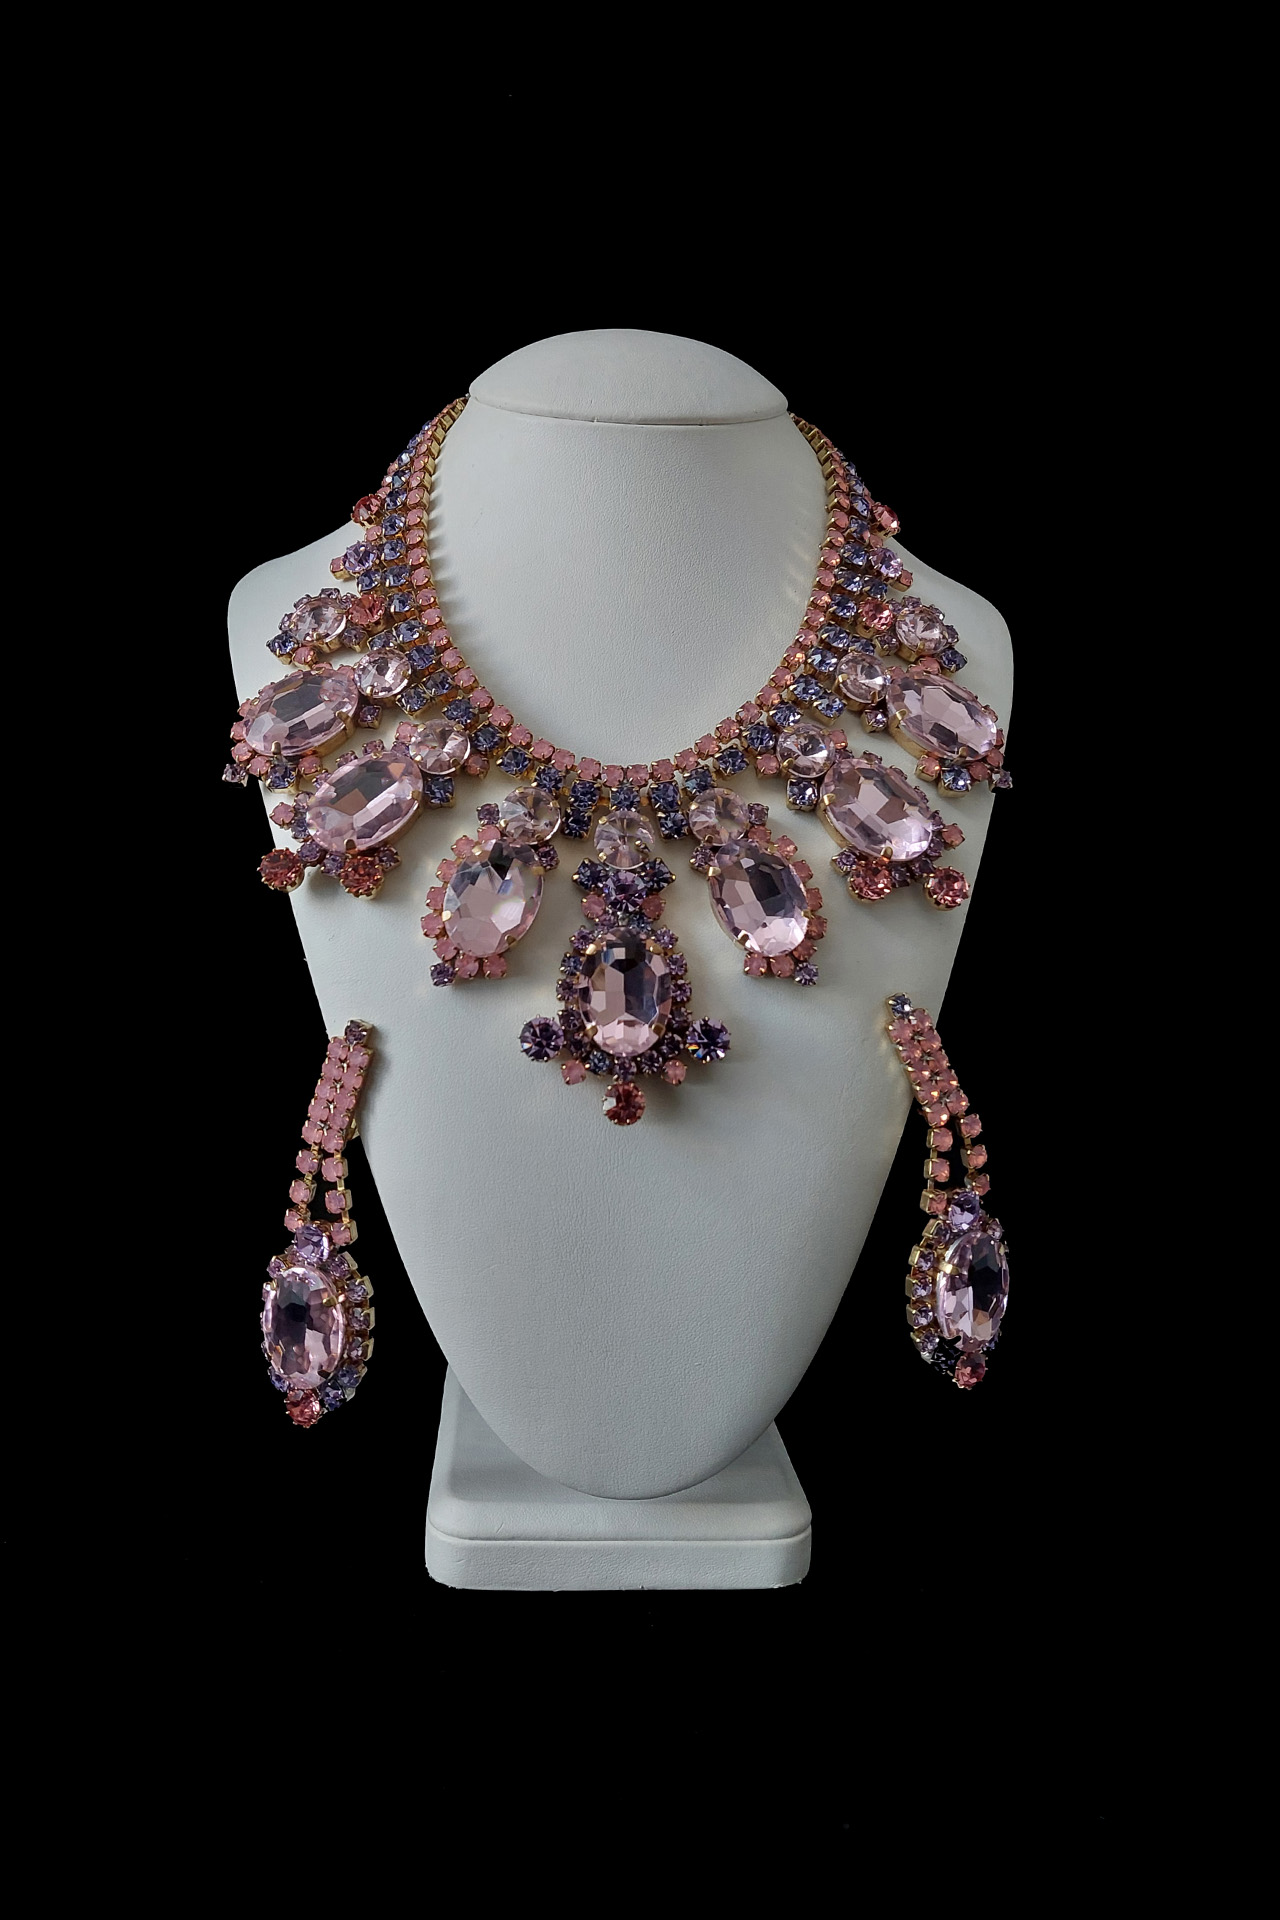 Handmade earrings and necklace from pink rhinestones